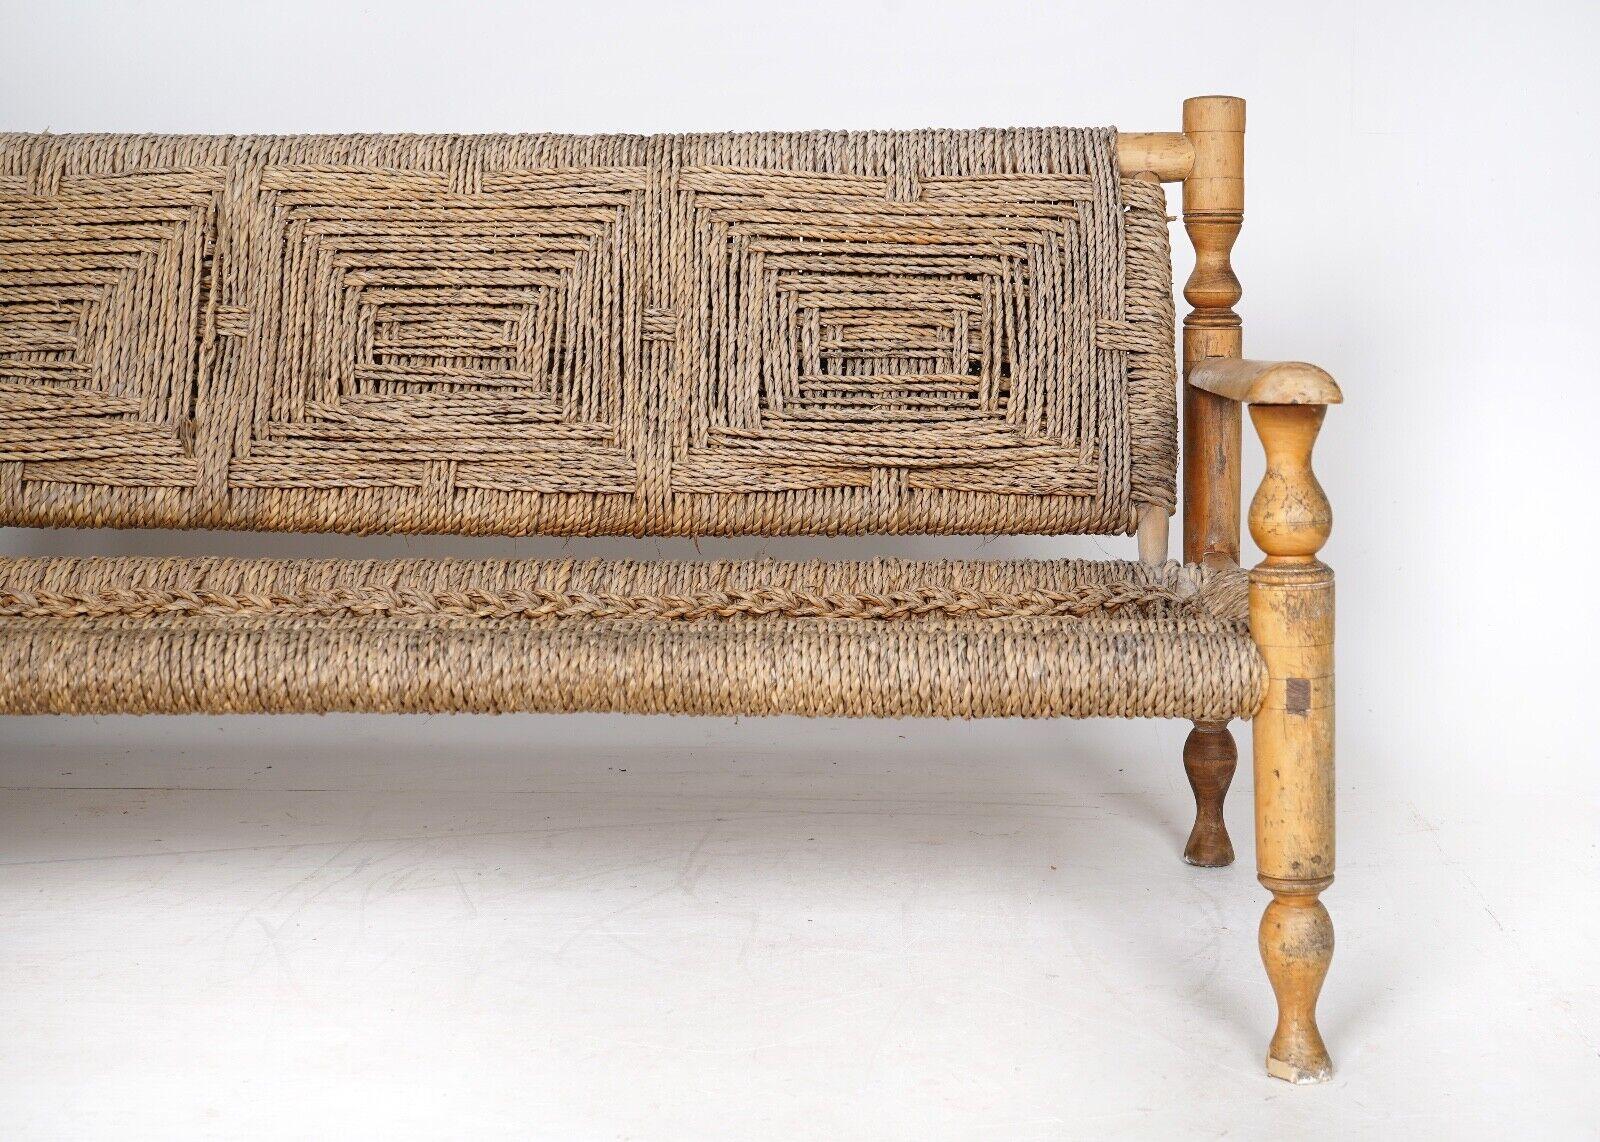 1950's French Bench by Adrien Audoux and Frida Minnet - Hemp Rope Seat  2